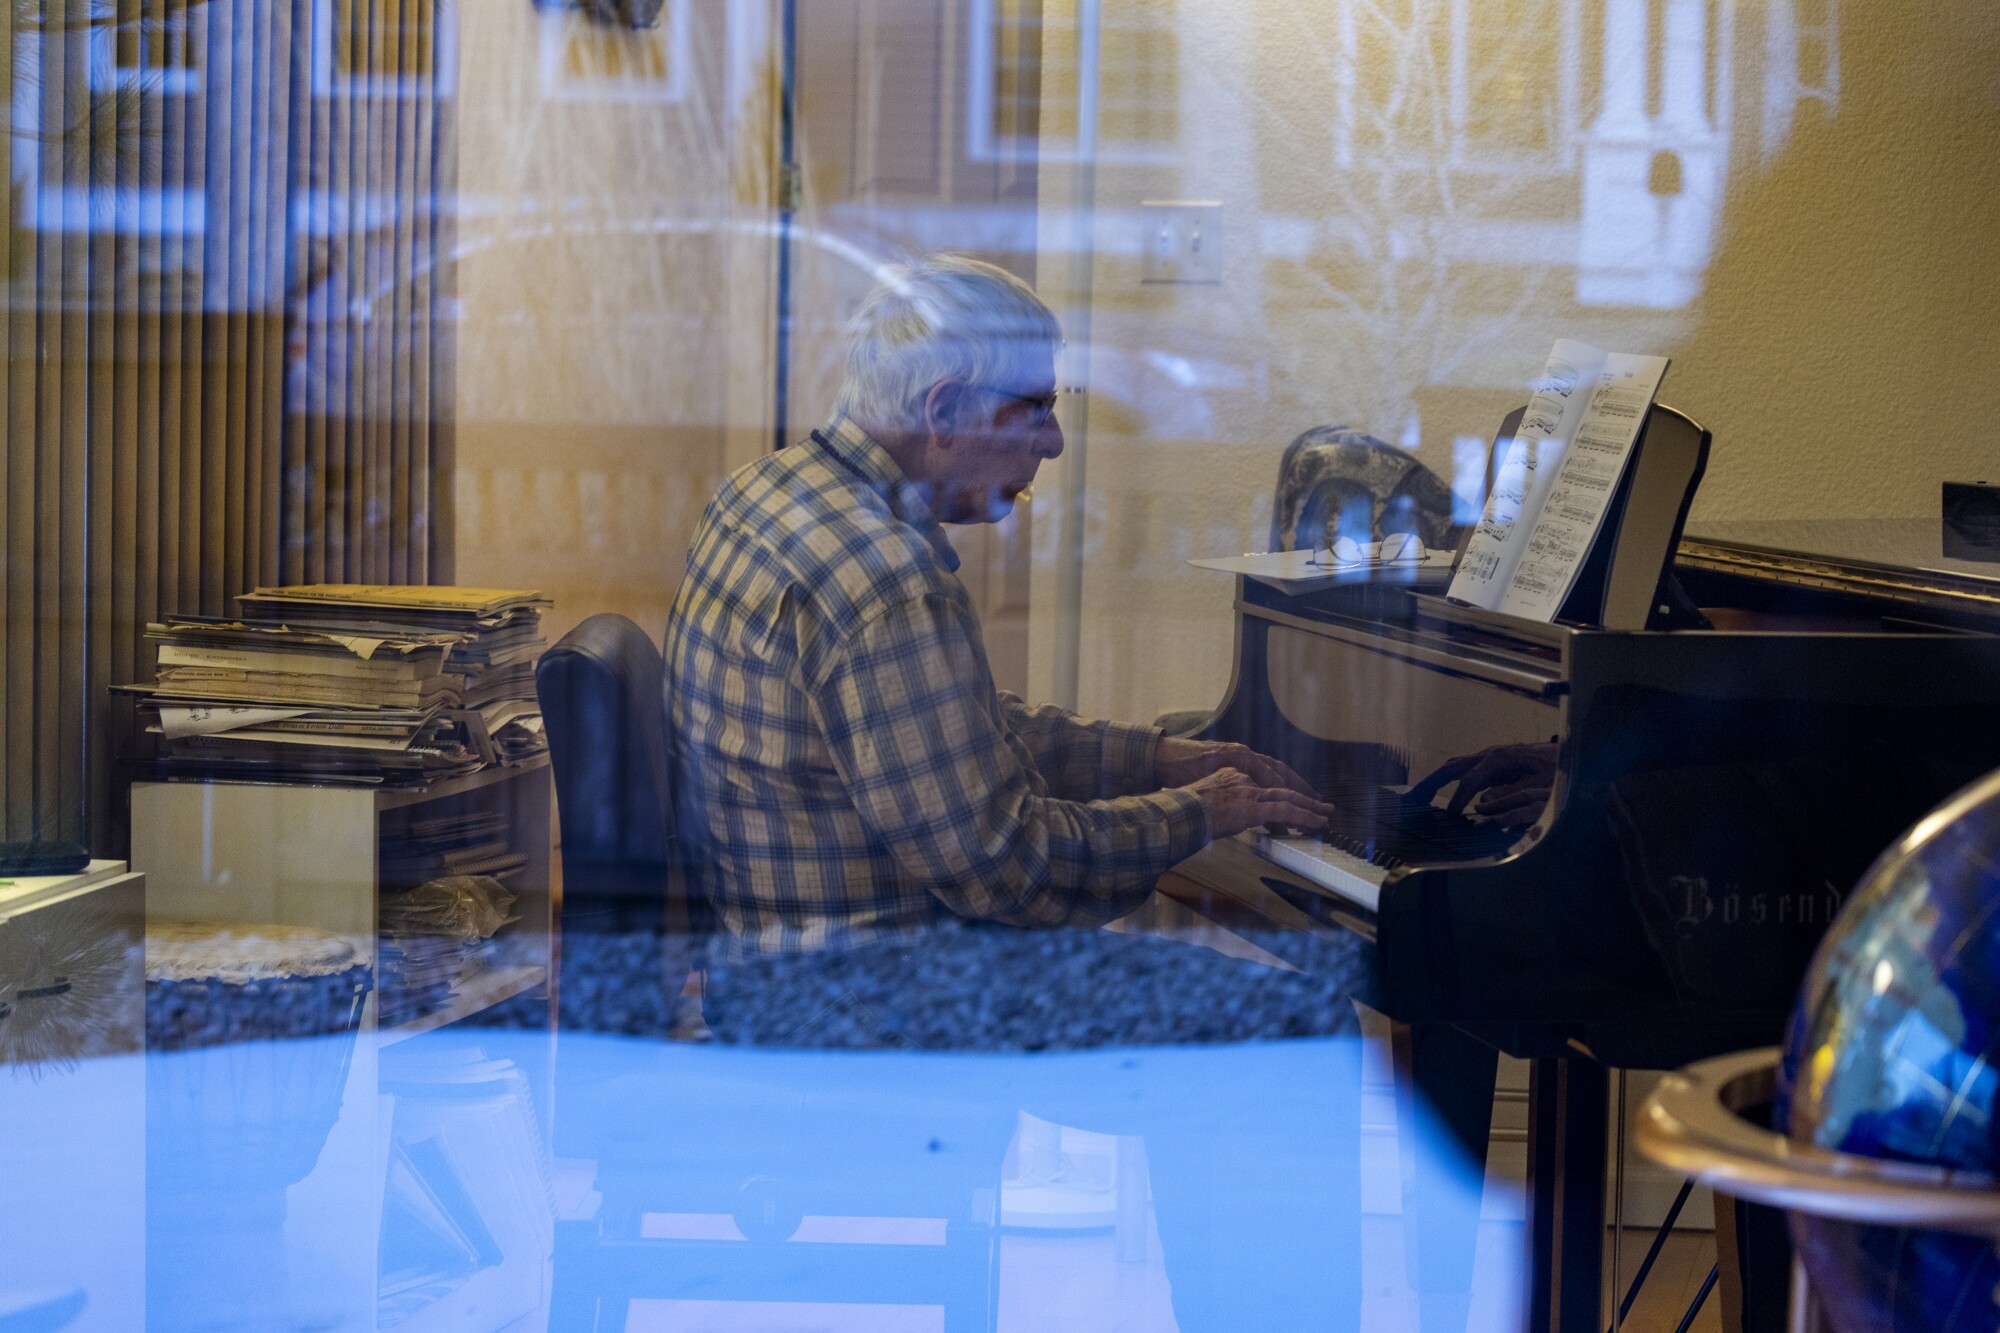 Reflections are cast on a window as Dr. Warren Hern plays the piano.